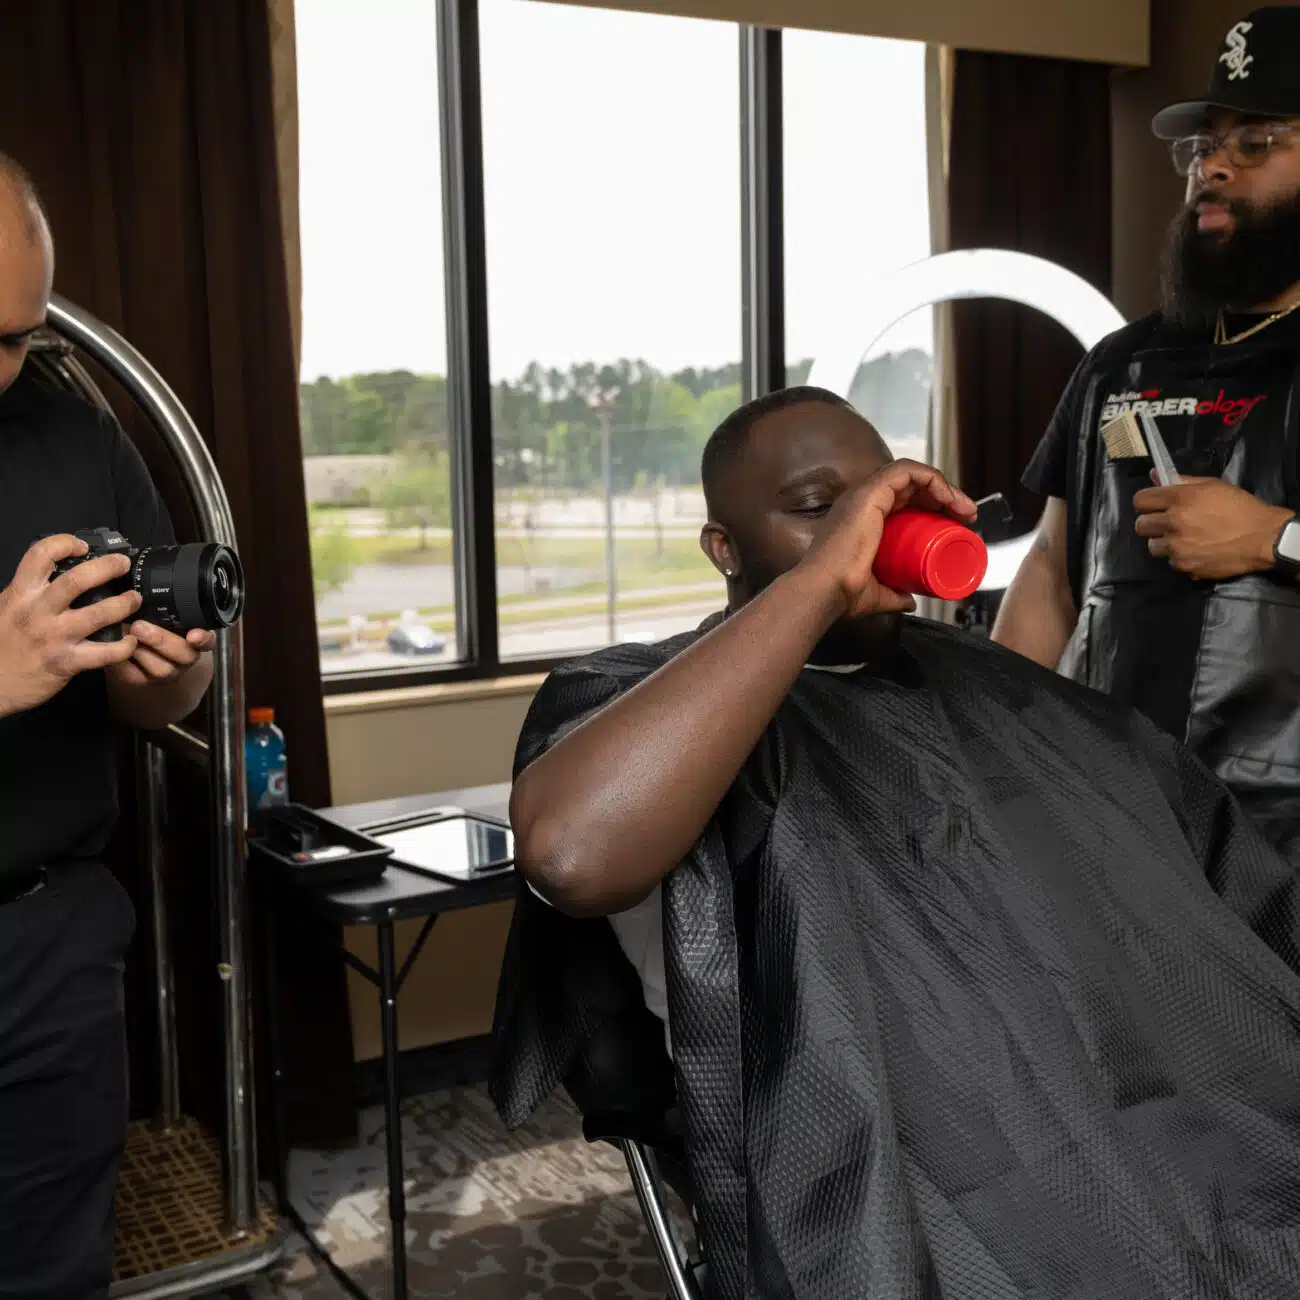 Groom getting his hair cut for his wedding and going through the wedding process with all of his groomsmen. While the videographer is capturing candid moments for the groomsmen